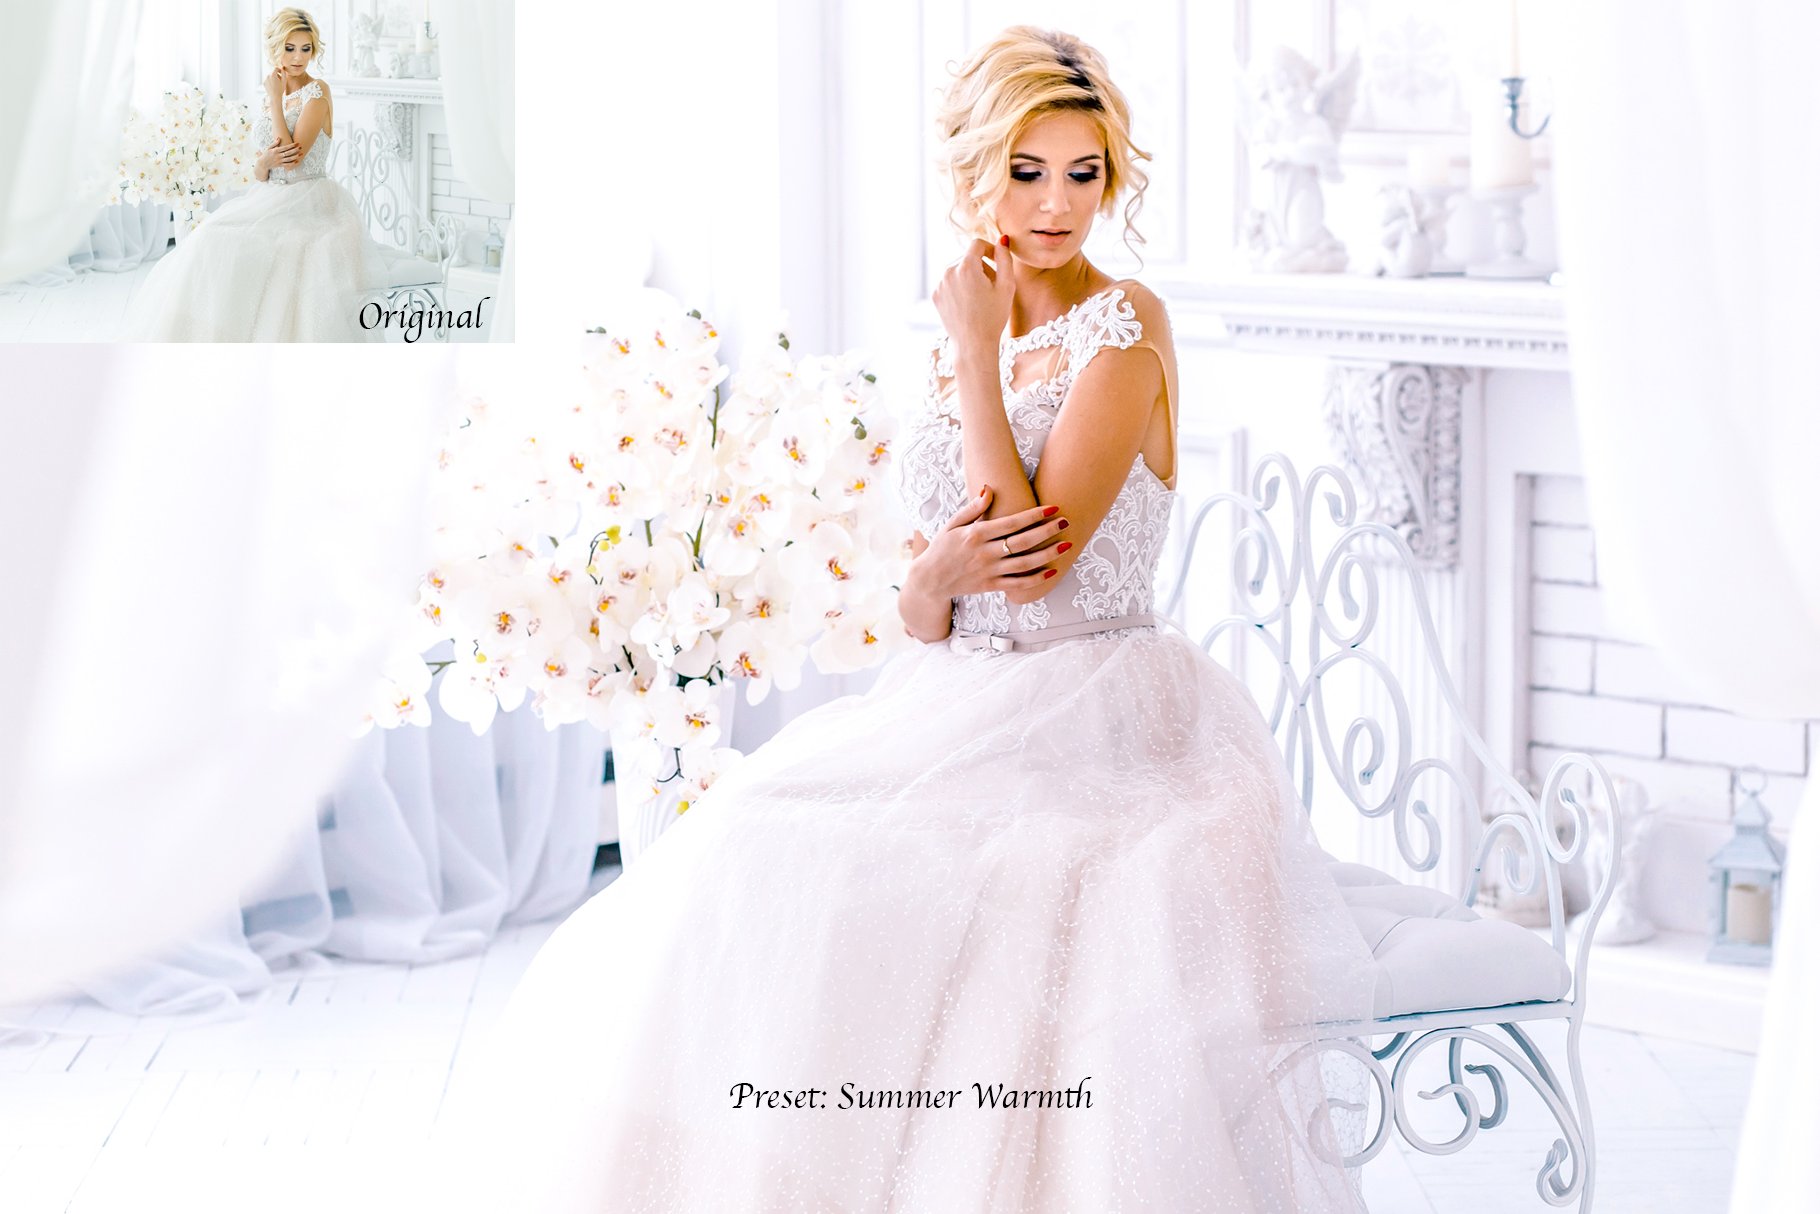 Top 30 Wedding Presets / Actionspreview image.